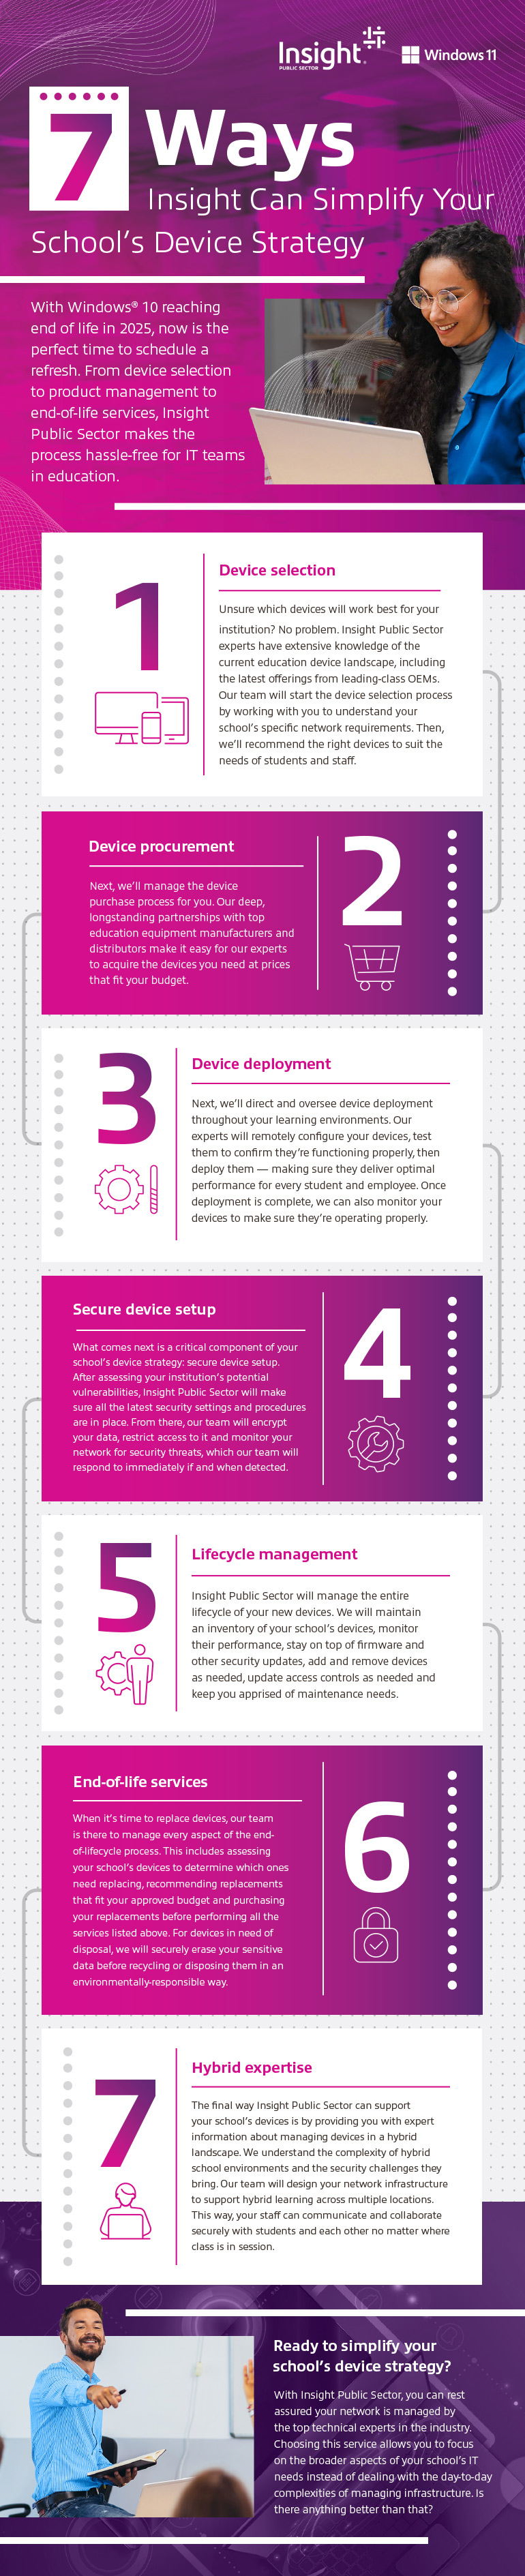 7 Ways Insight Can Simplify Your School’s Device Strategy infographic